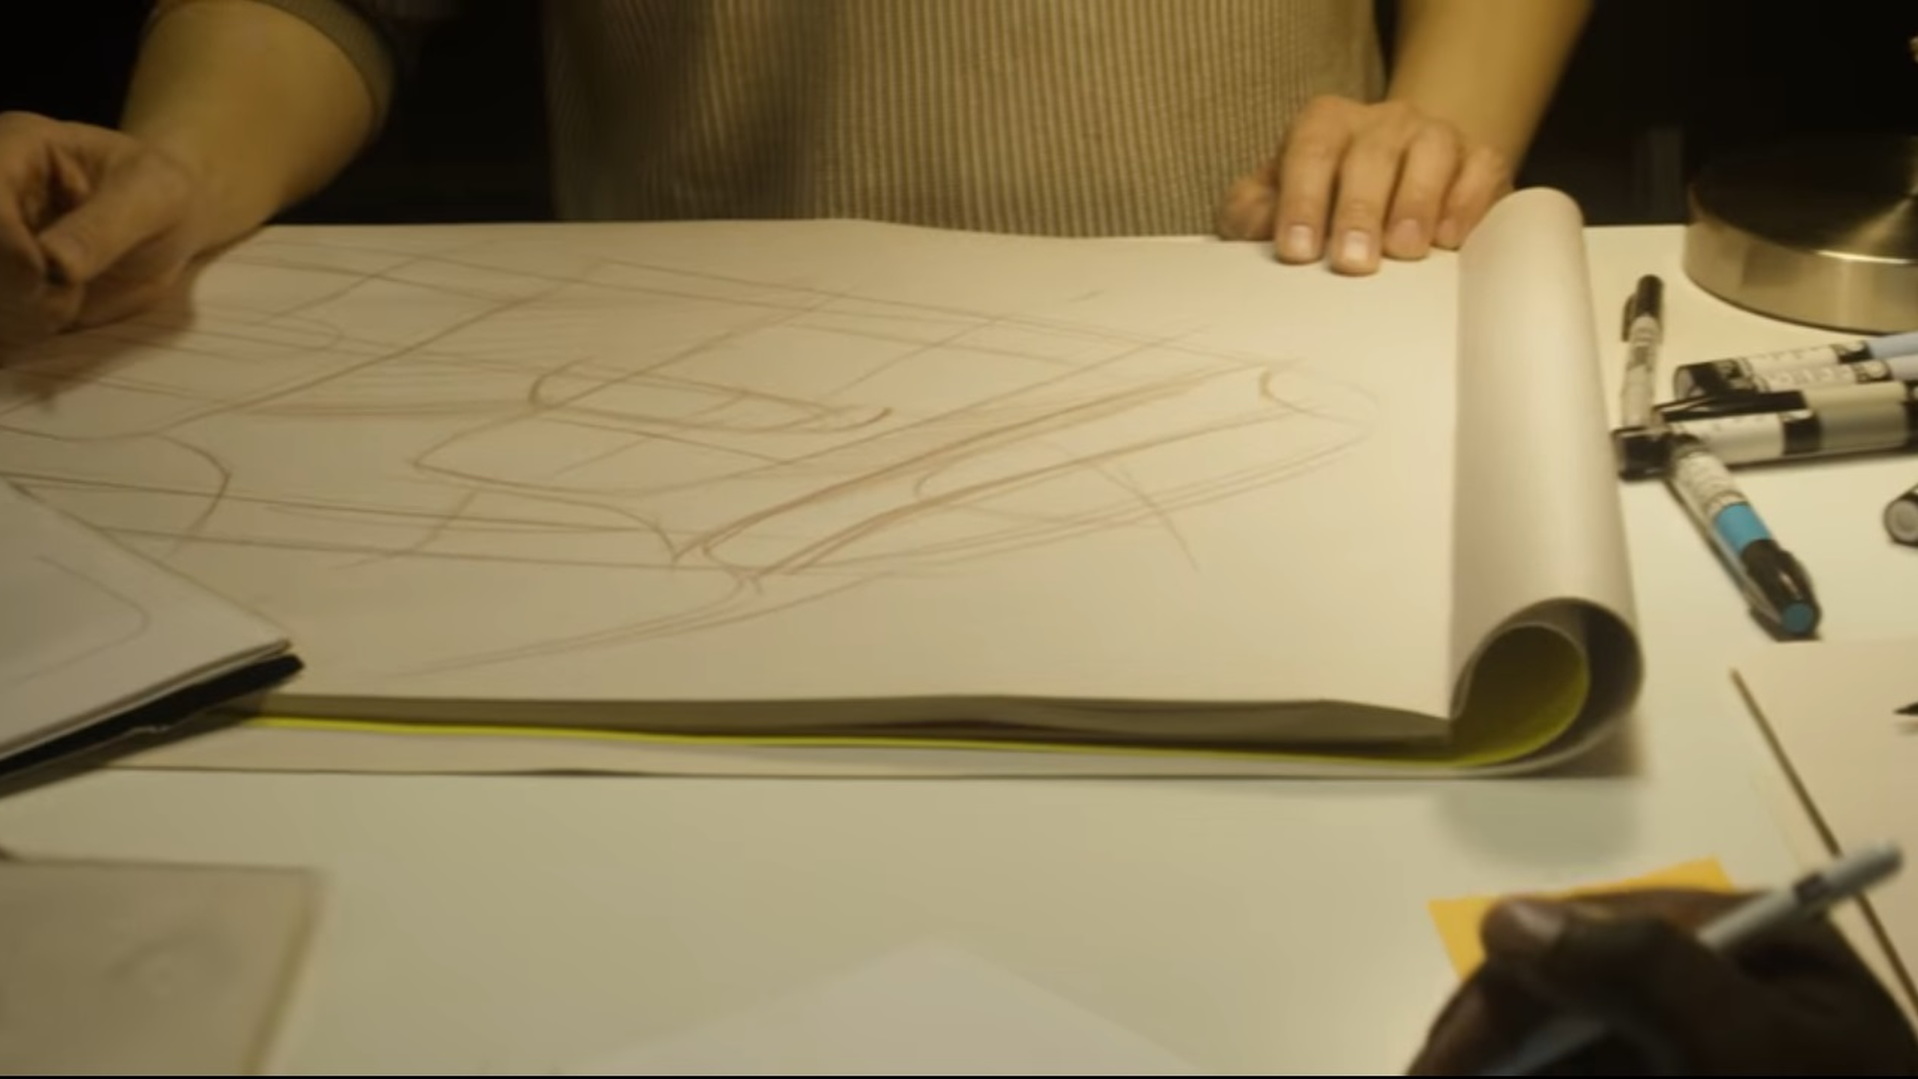 Image from "Introducing Rivian | Our Vision" video, January 2017